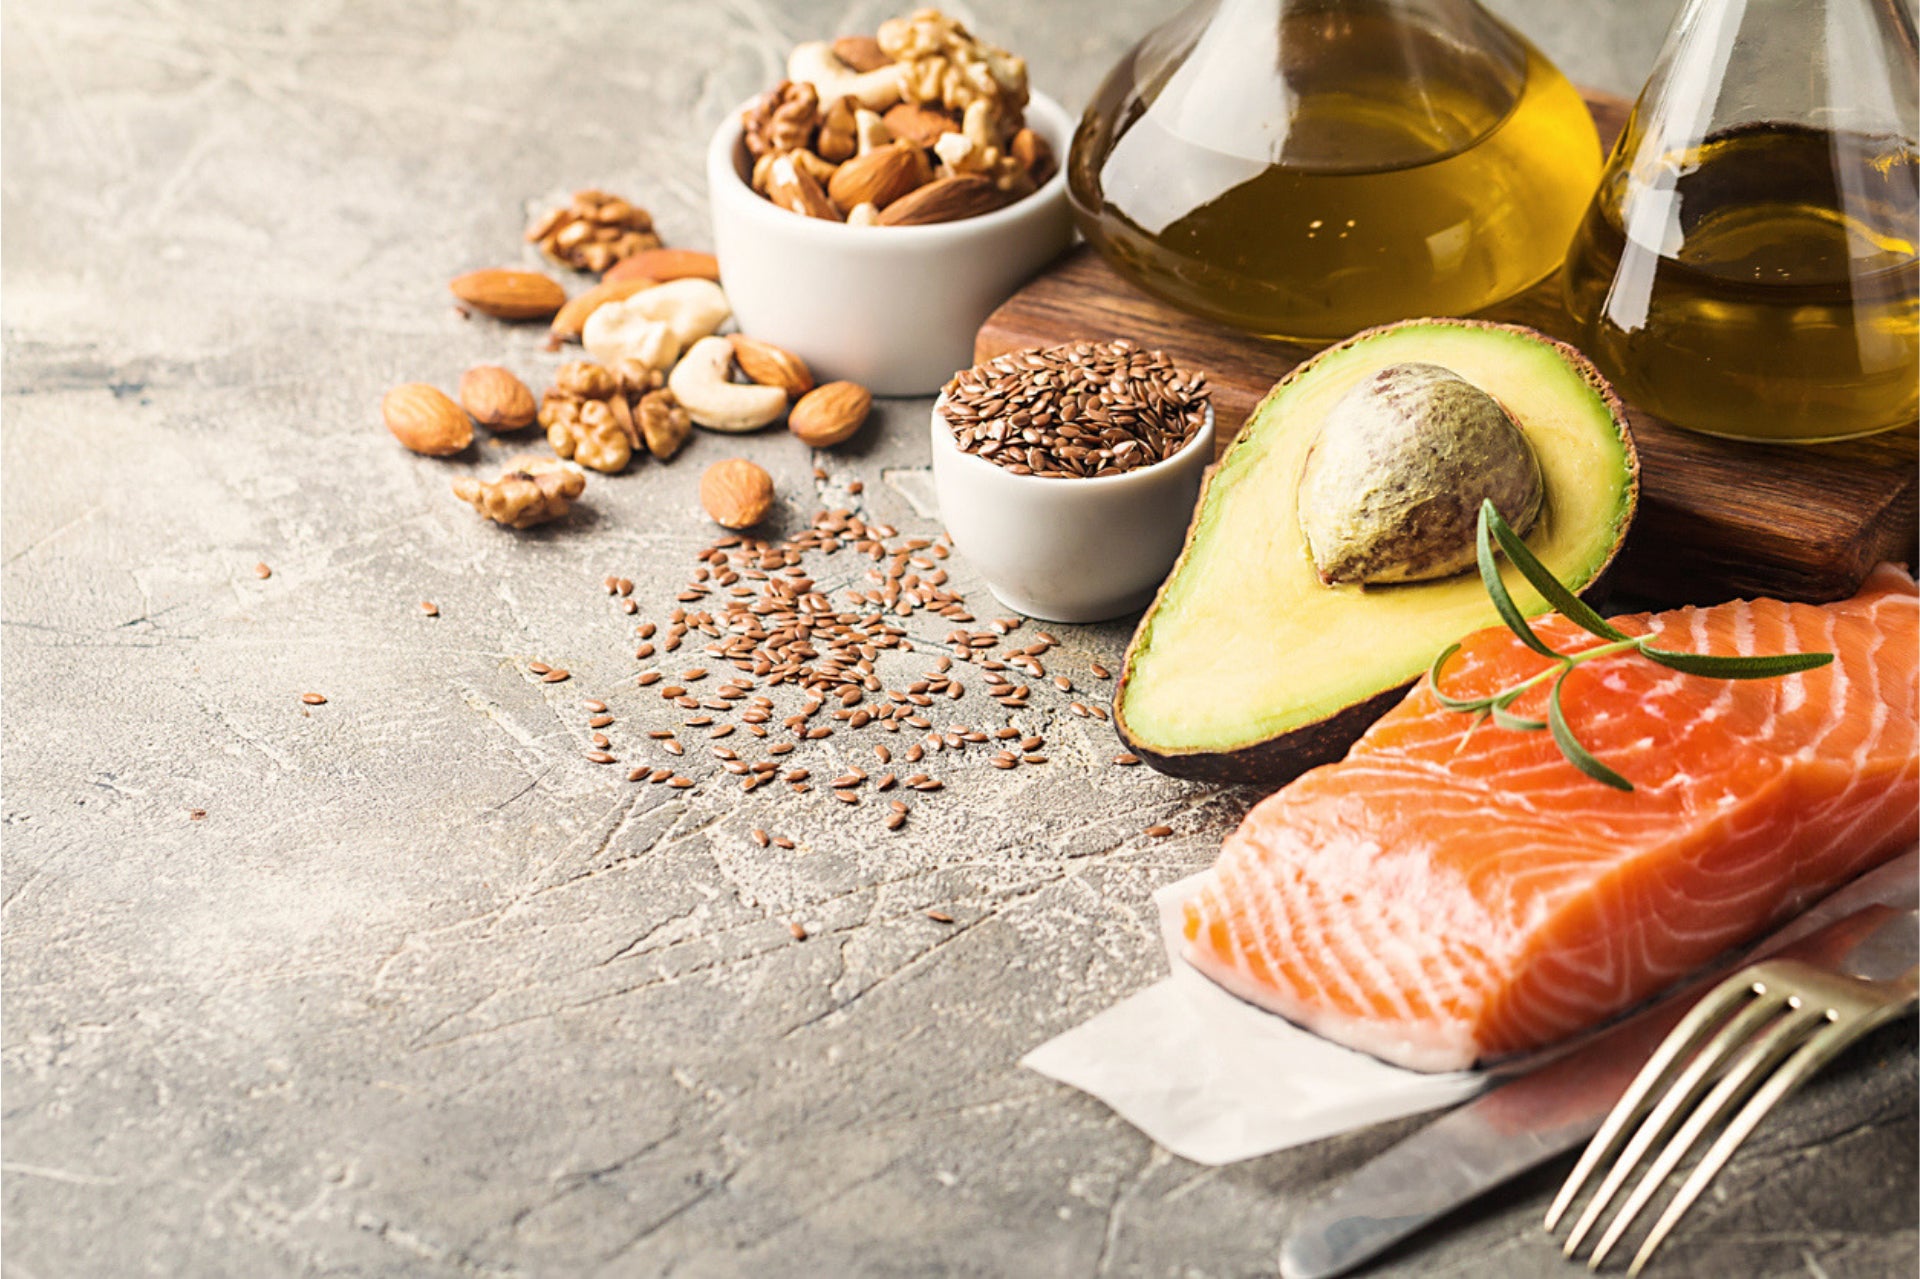 Omega-3 - Are we really getting enough?